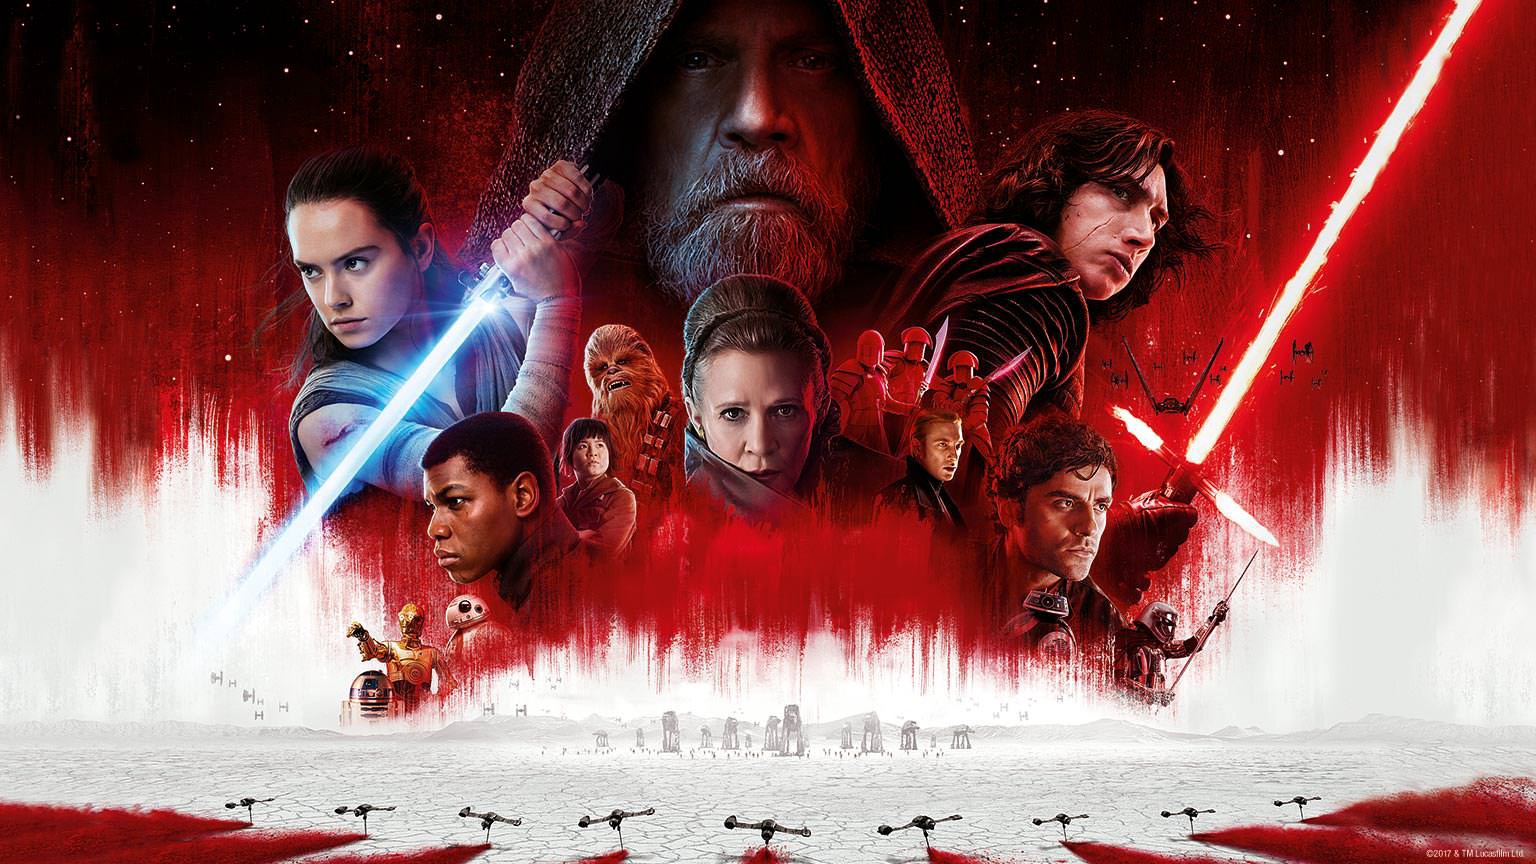 The Deeper Role of Resistance in 'Star Wars: The Last Jedi' - The